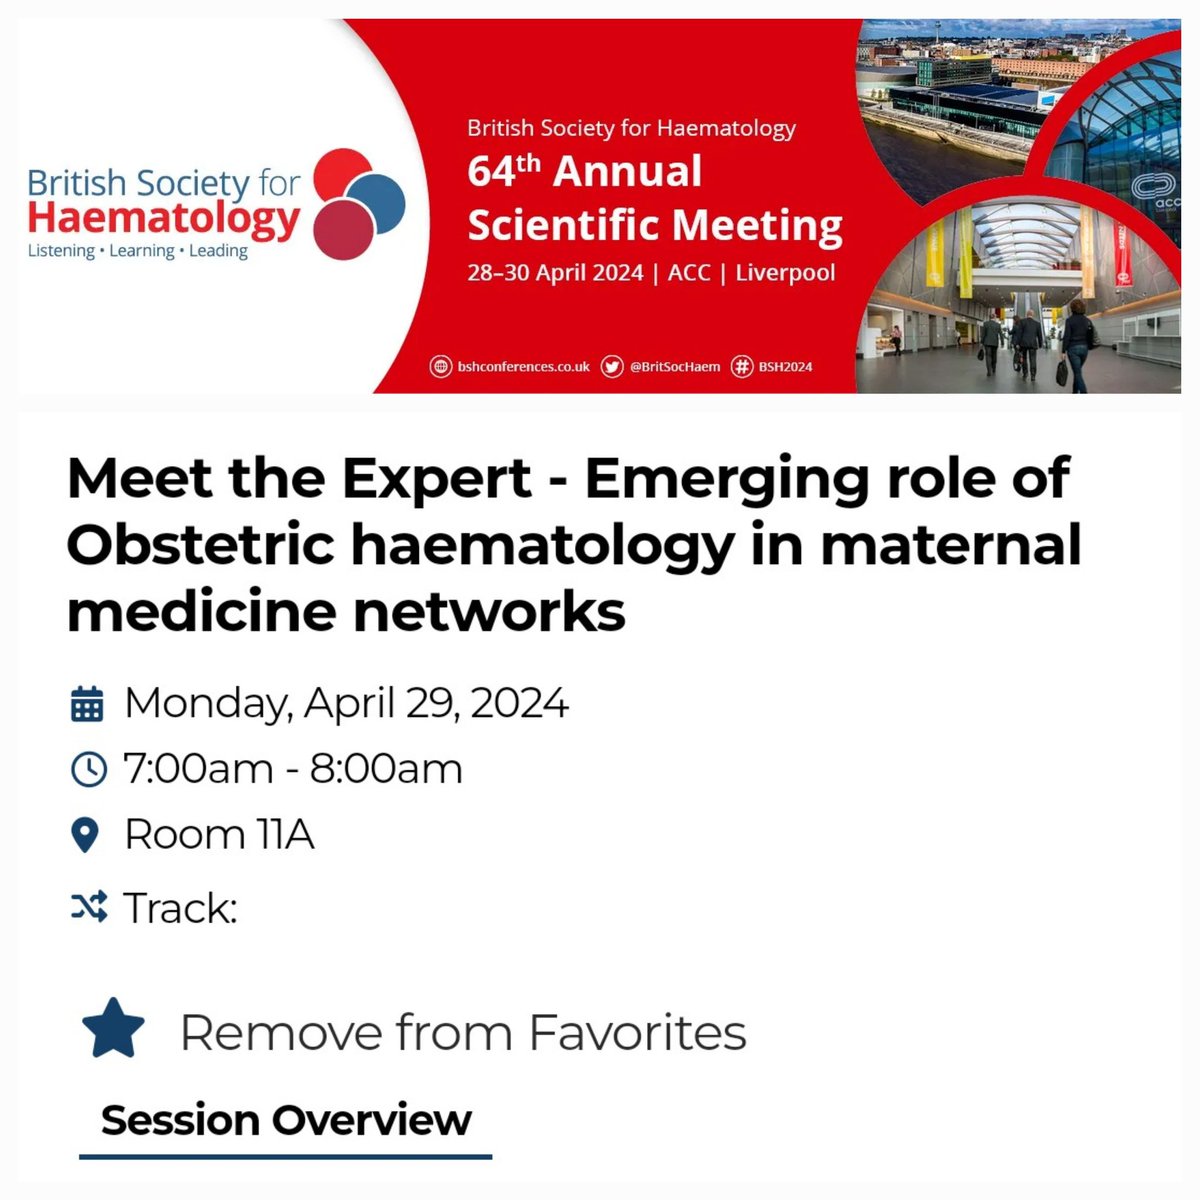 I had a great start this morning talking with experts from #Obstetrics and #Haematology discussing complex cases of #ITP #VTE #MPN #RPL #Dysfibrinogenemia #ThrombophiliaTesting 🤔 Looking forward to the #ObstetricHaematology session later this morning. These collaborations help